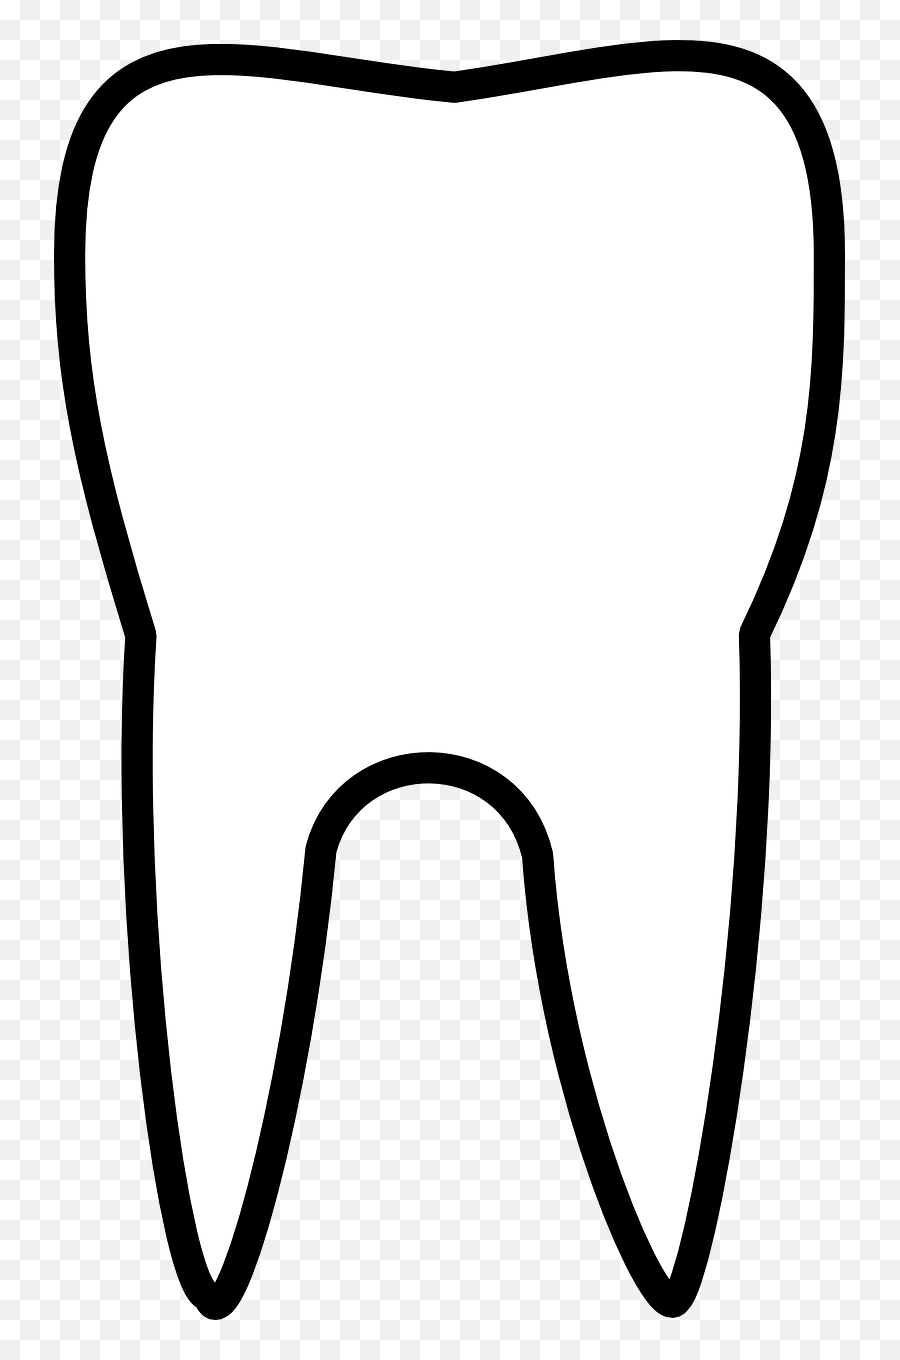 Tooth Clipart Teeth - Clip Art Tooth Emoji,Tooth Clipart